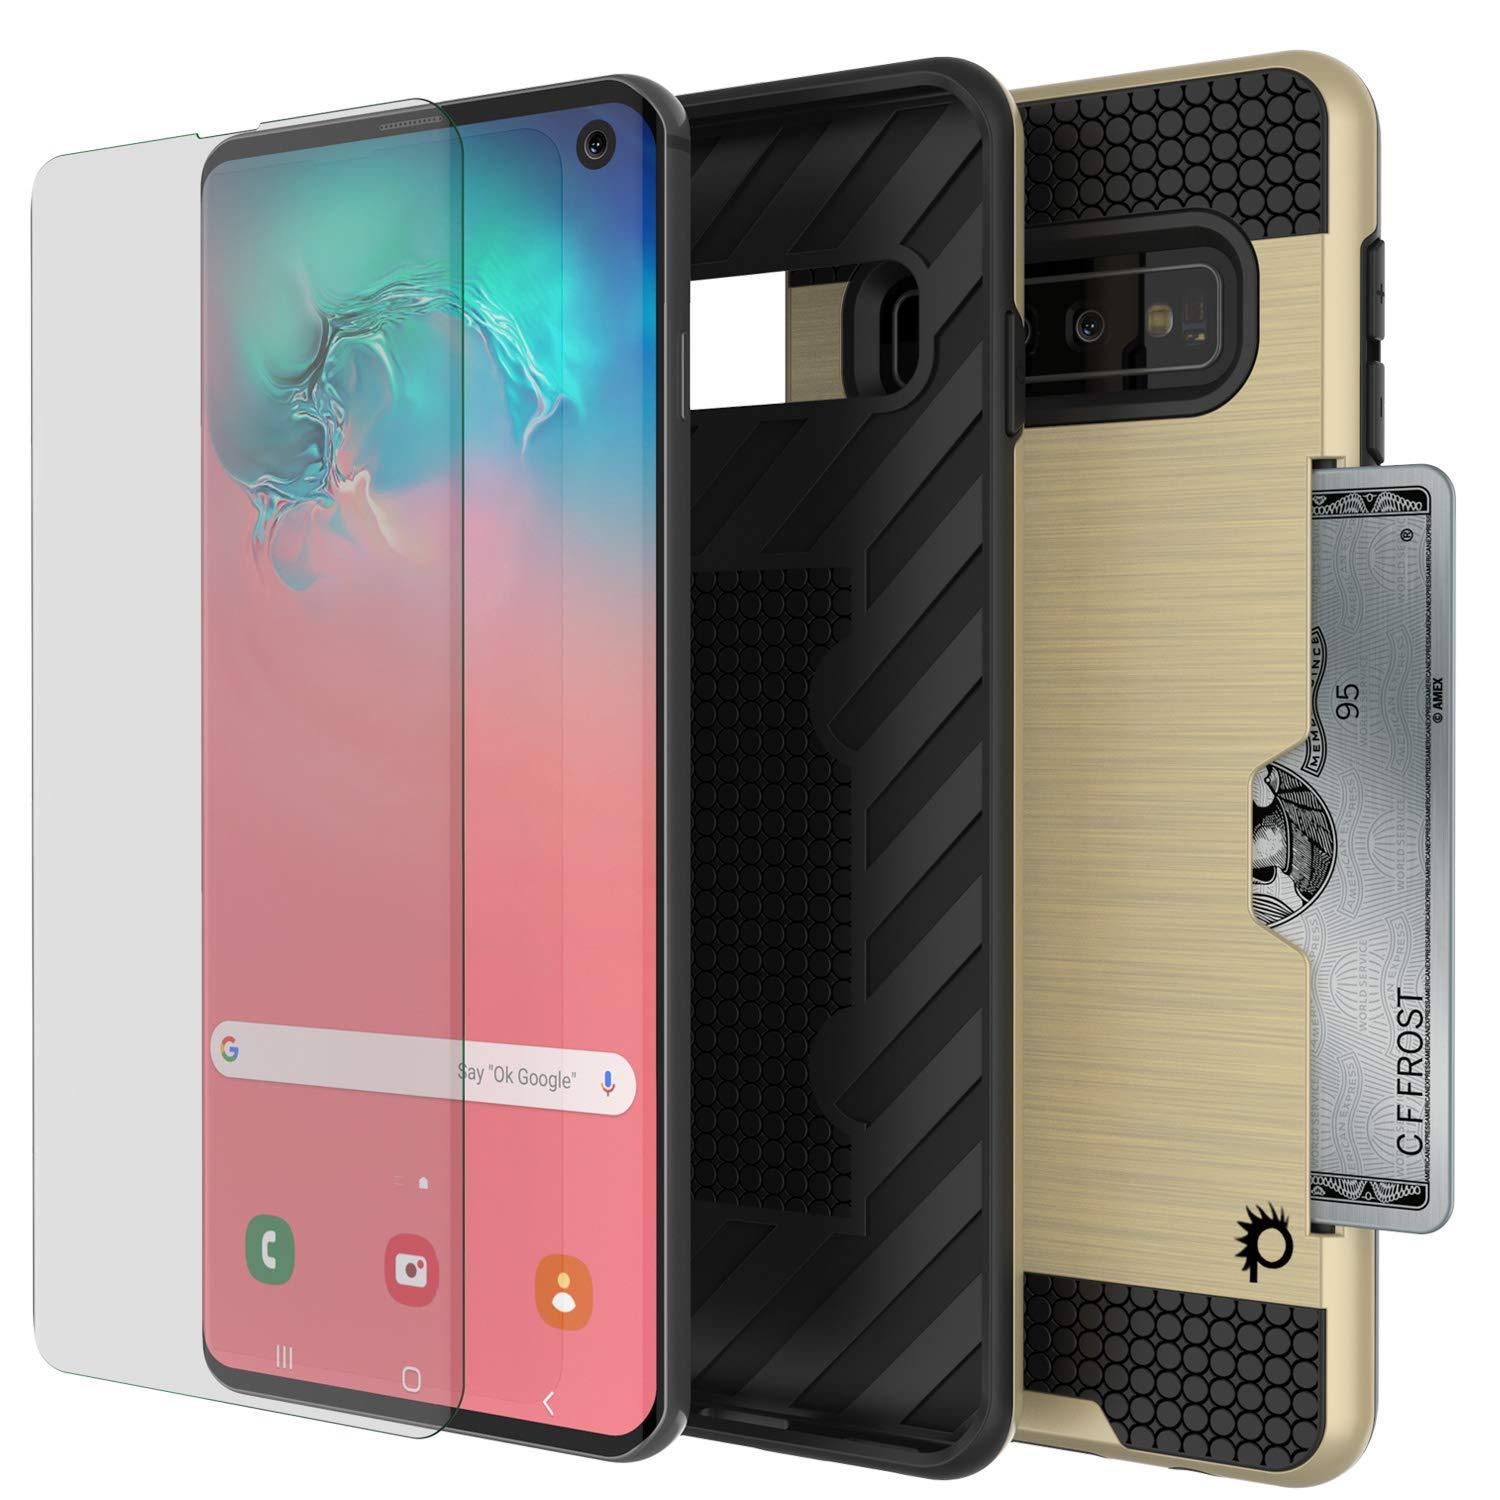 Galaxy S10 Case, PUNKcase [SLOT Series] [Slim Fit] Dual-Layer Armor Cover w/Integrated Anti-Shock System, Credit Card Slot [Gold]